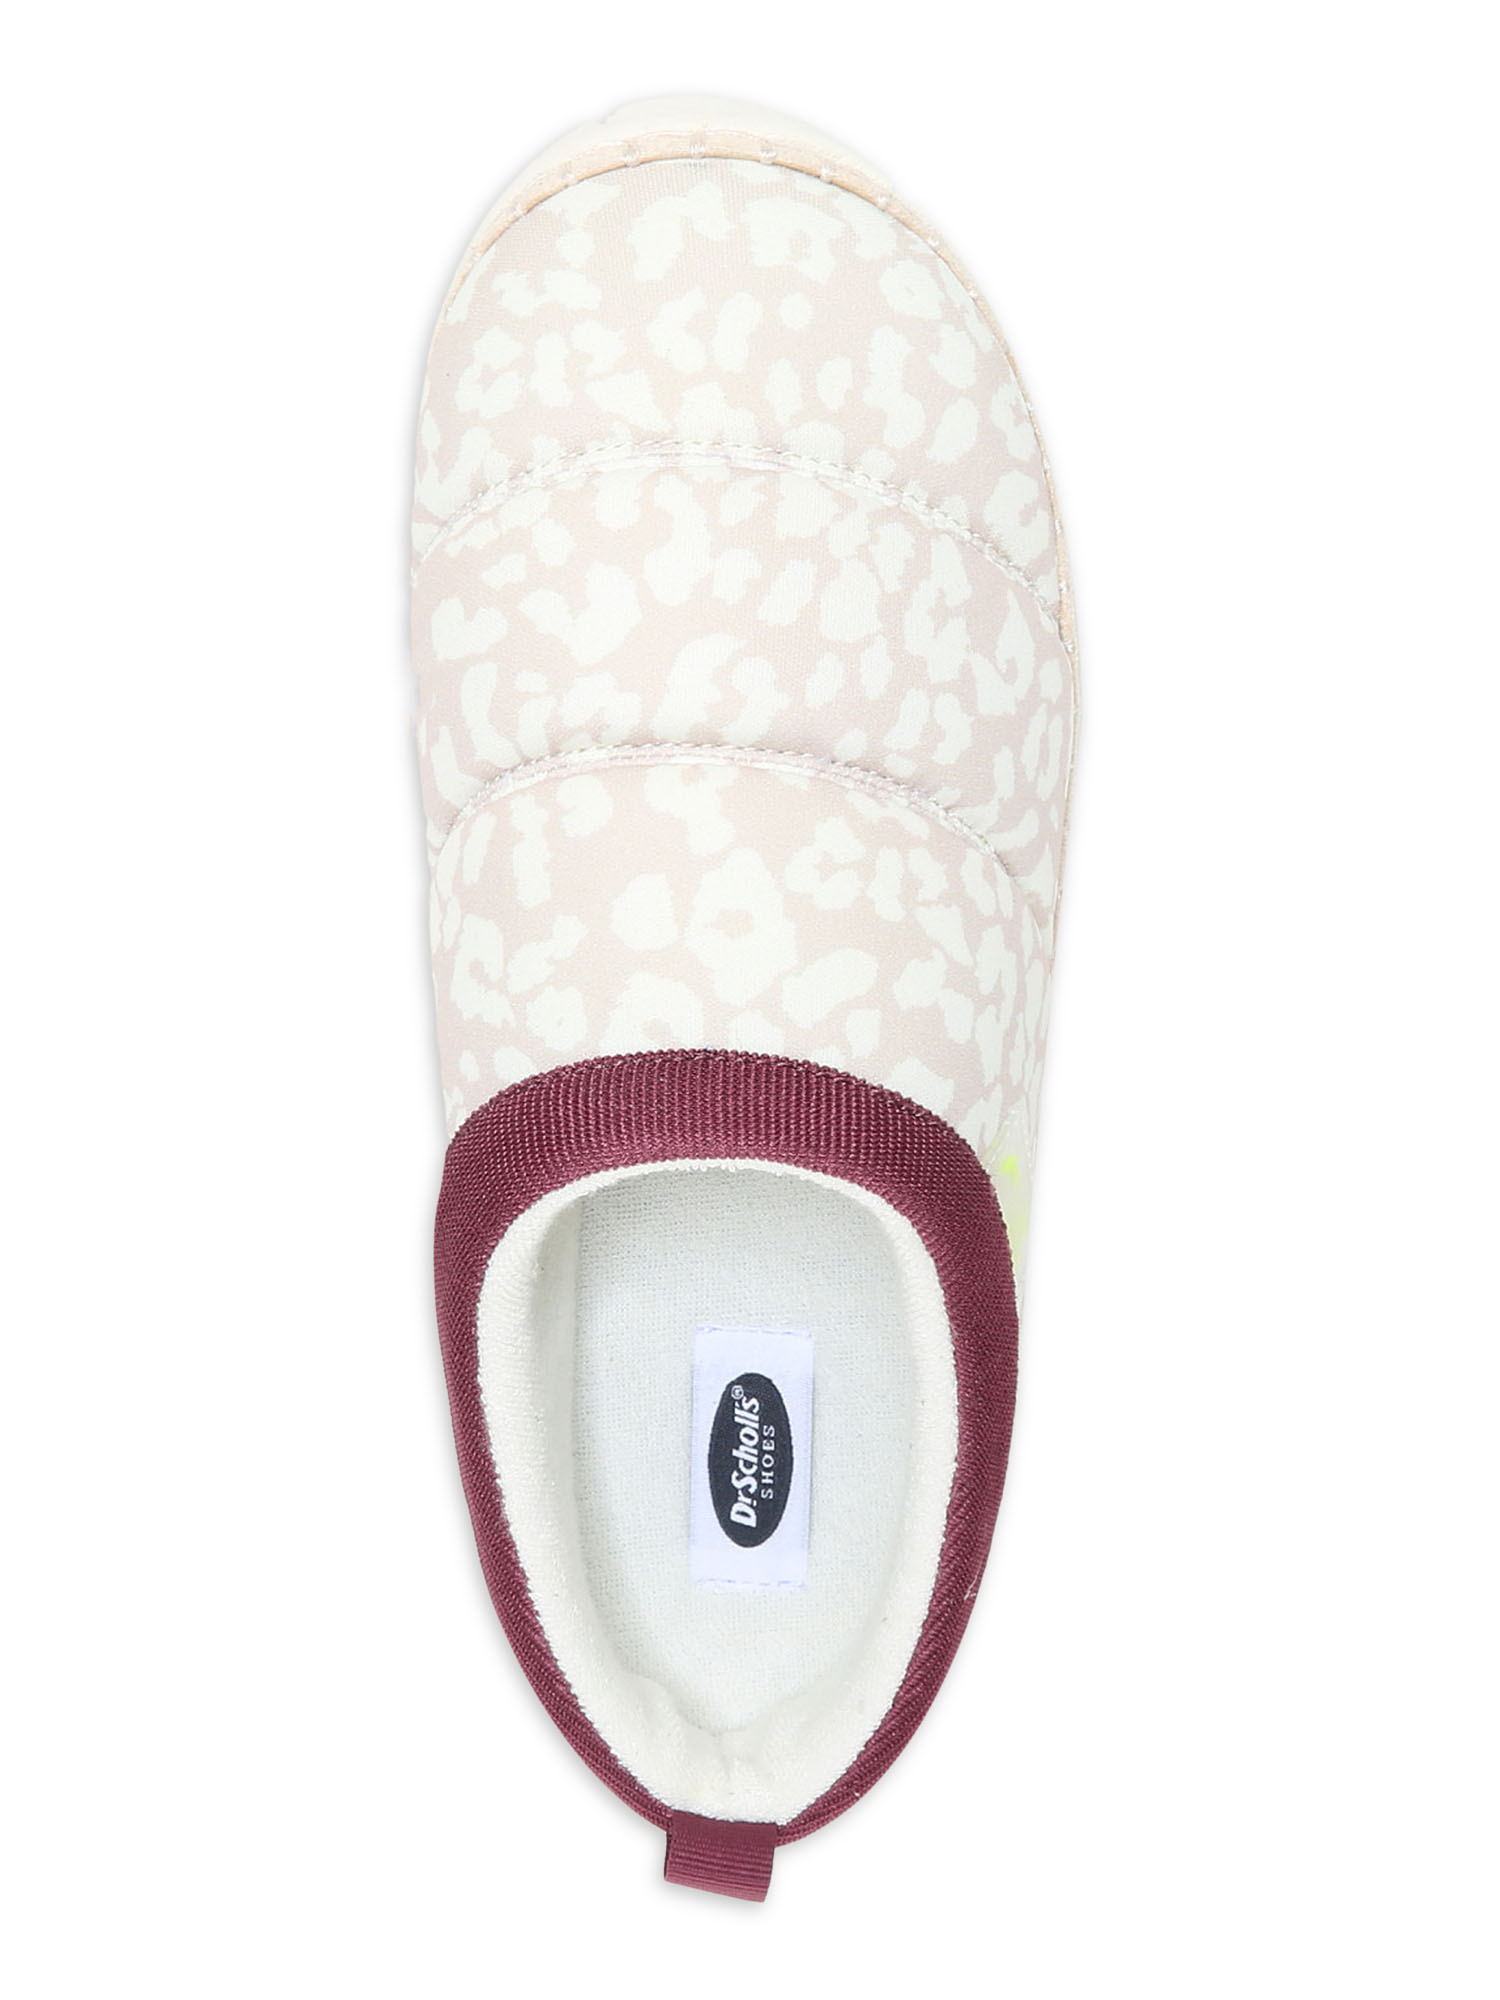 Dr. Scholl's Women's Cozy Vibes Quilted Slipper - image 4 of 6